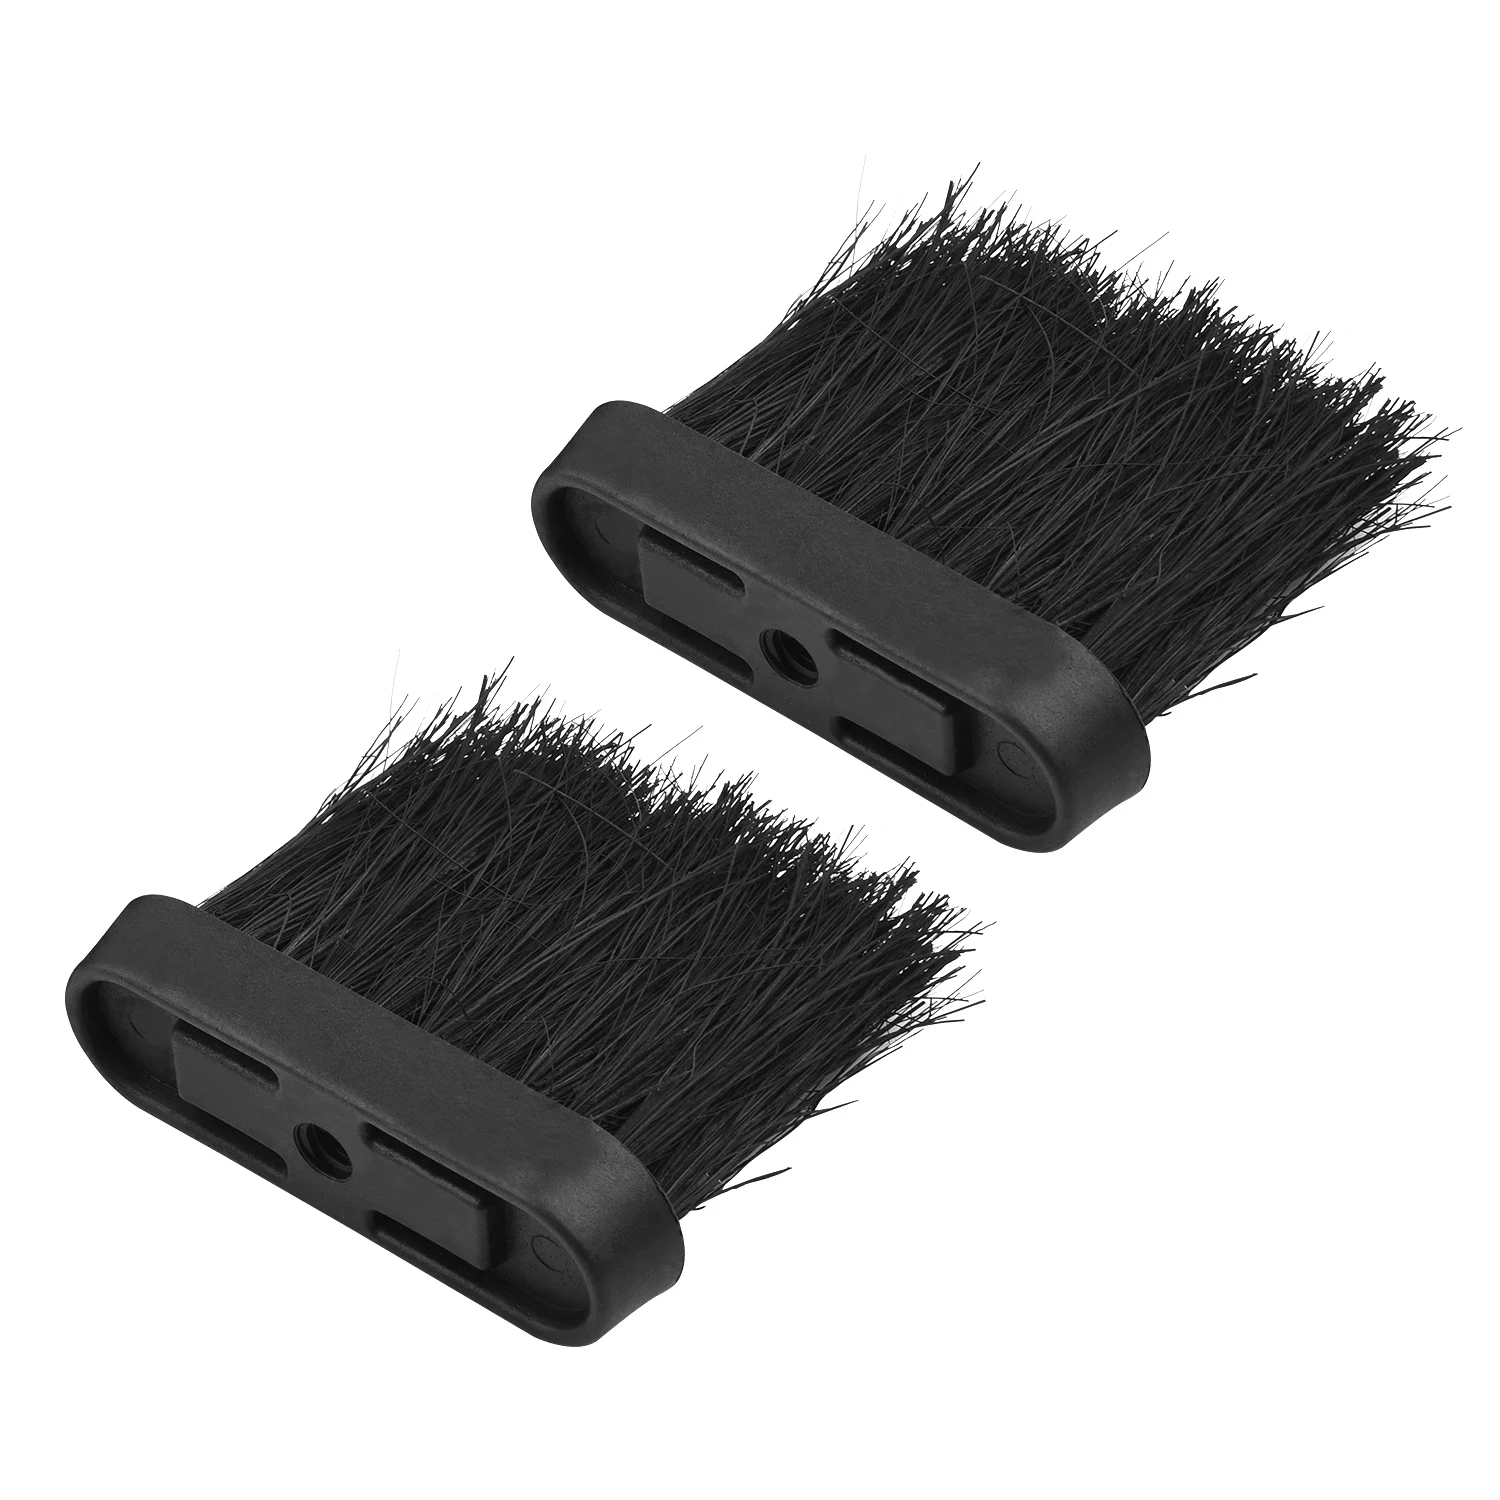 Durable High Quality Hot New Home Fireplace Brush Hearth Brushes Black Accessories Cleaning Companion Fire Tools